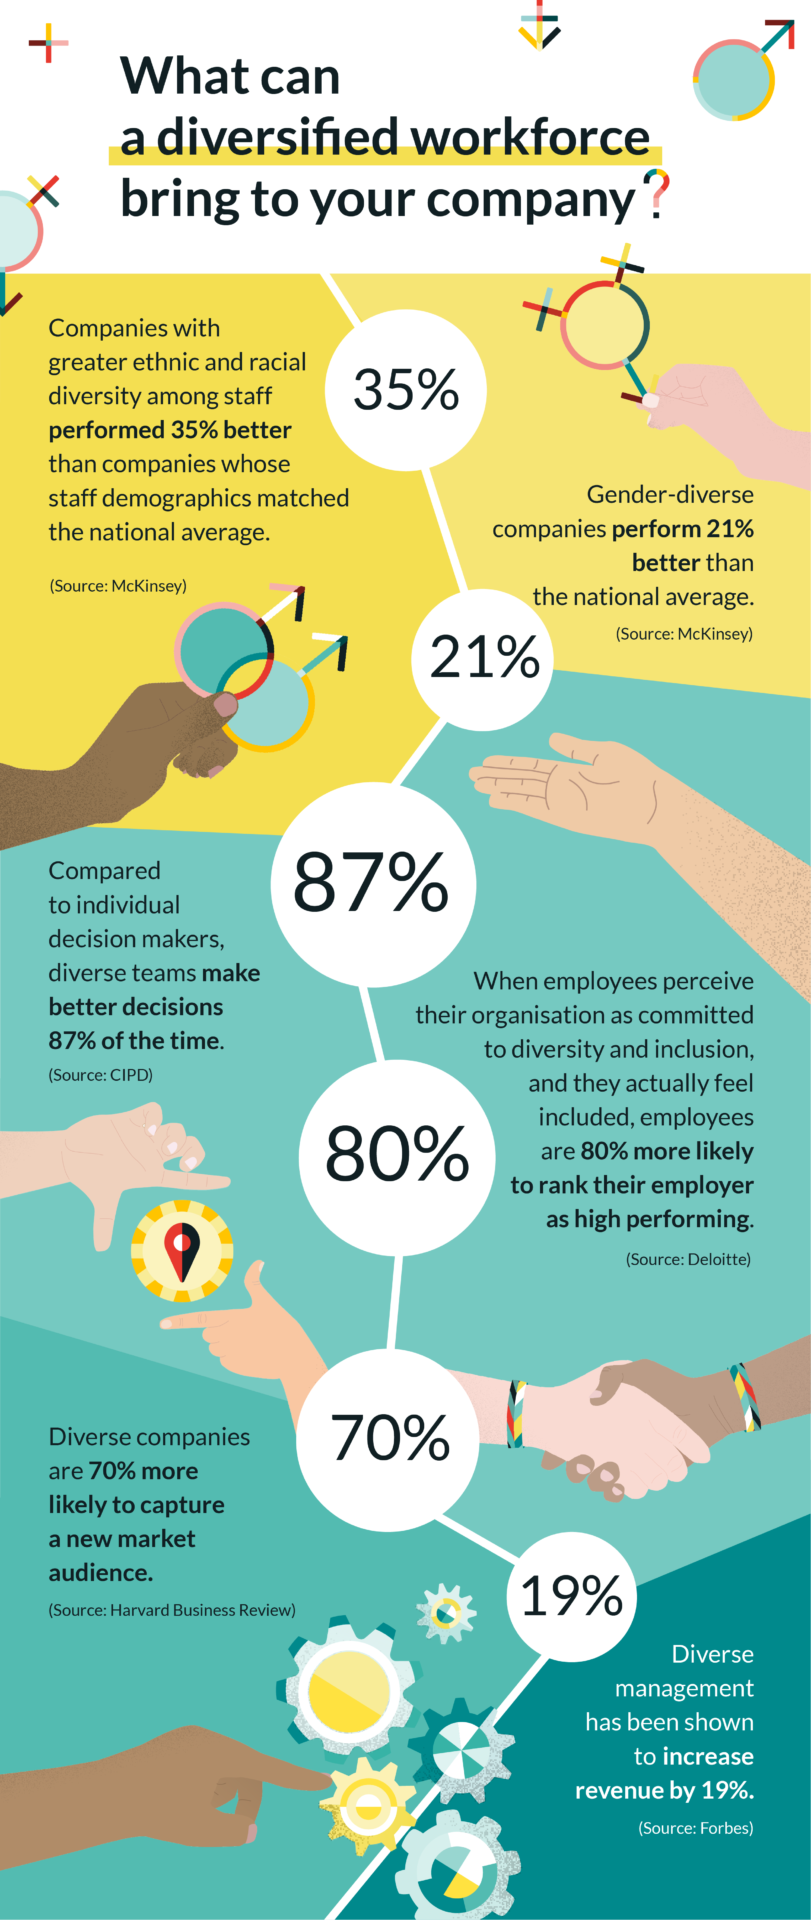 EDI Infographic Stats

Companies with
greater ethnic and racial
diversity among staff
performed 35% better
than companies whose
staff demographics matched
the national average.

Gender-diverse
companies perform 21%
better than
the national average.

Compared
to individual
decision makers,
diverse teams make
better decisions
87% of the time.

When employees perceive
their organisation as committed
to diversity and inclusion,
and they actually feel
included, employees
are 80% more likely
to rank their employer
as high performing.

Diverse companies
are 70% more
likely to capture
a new market
audience.

Diverse
management
has been shown
to increase
revenue by 19%.